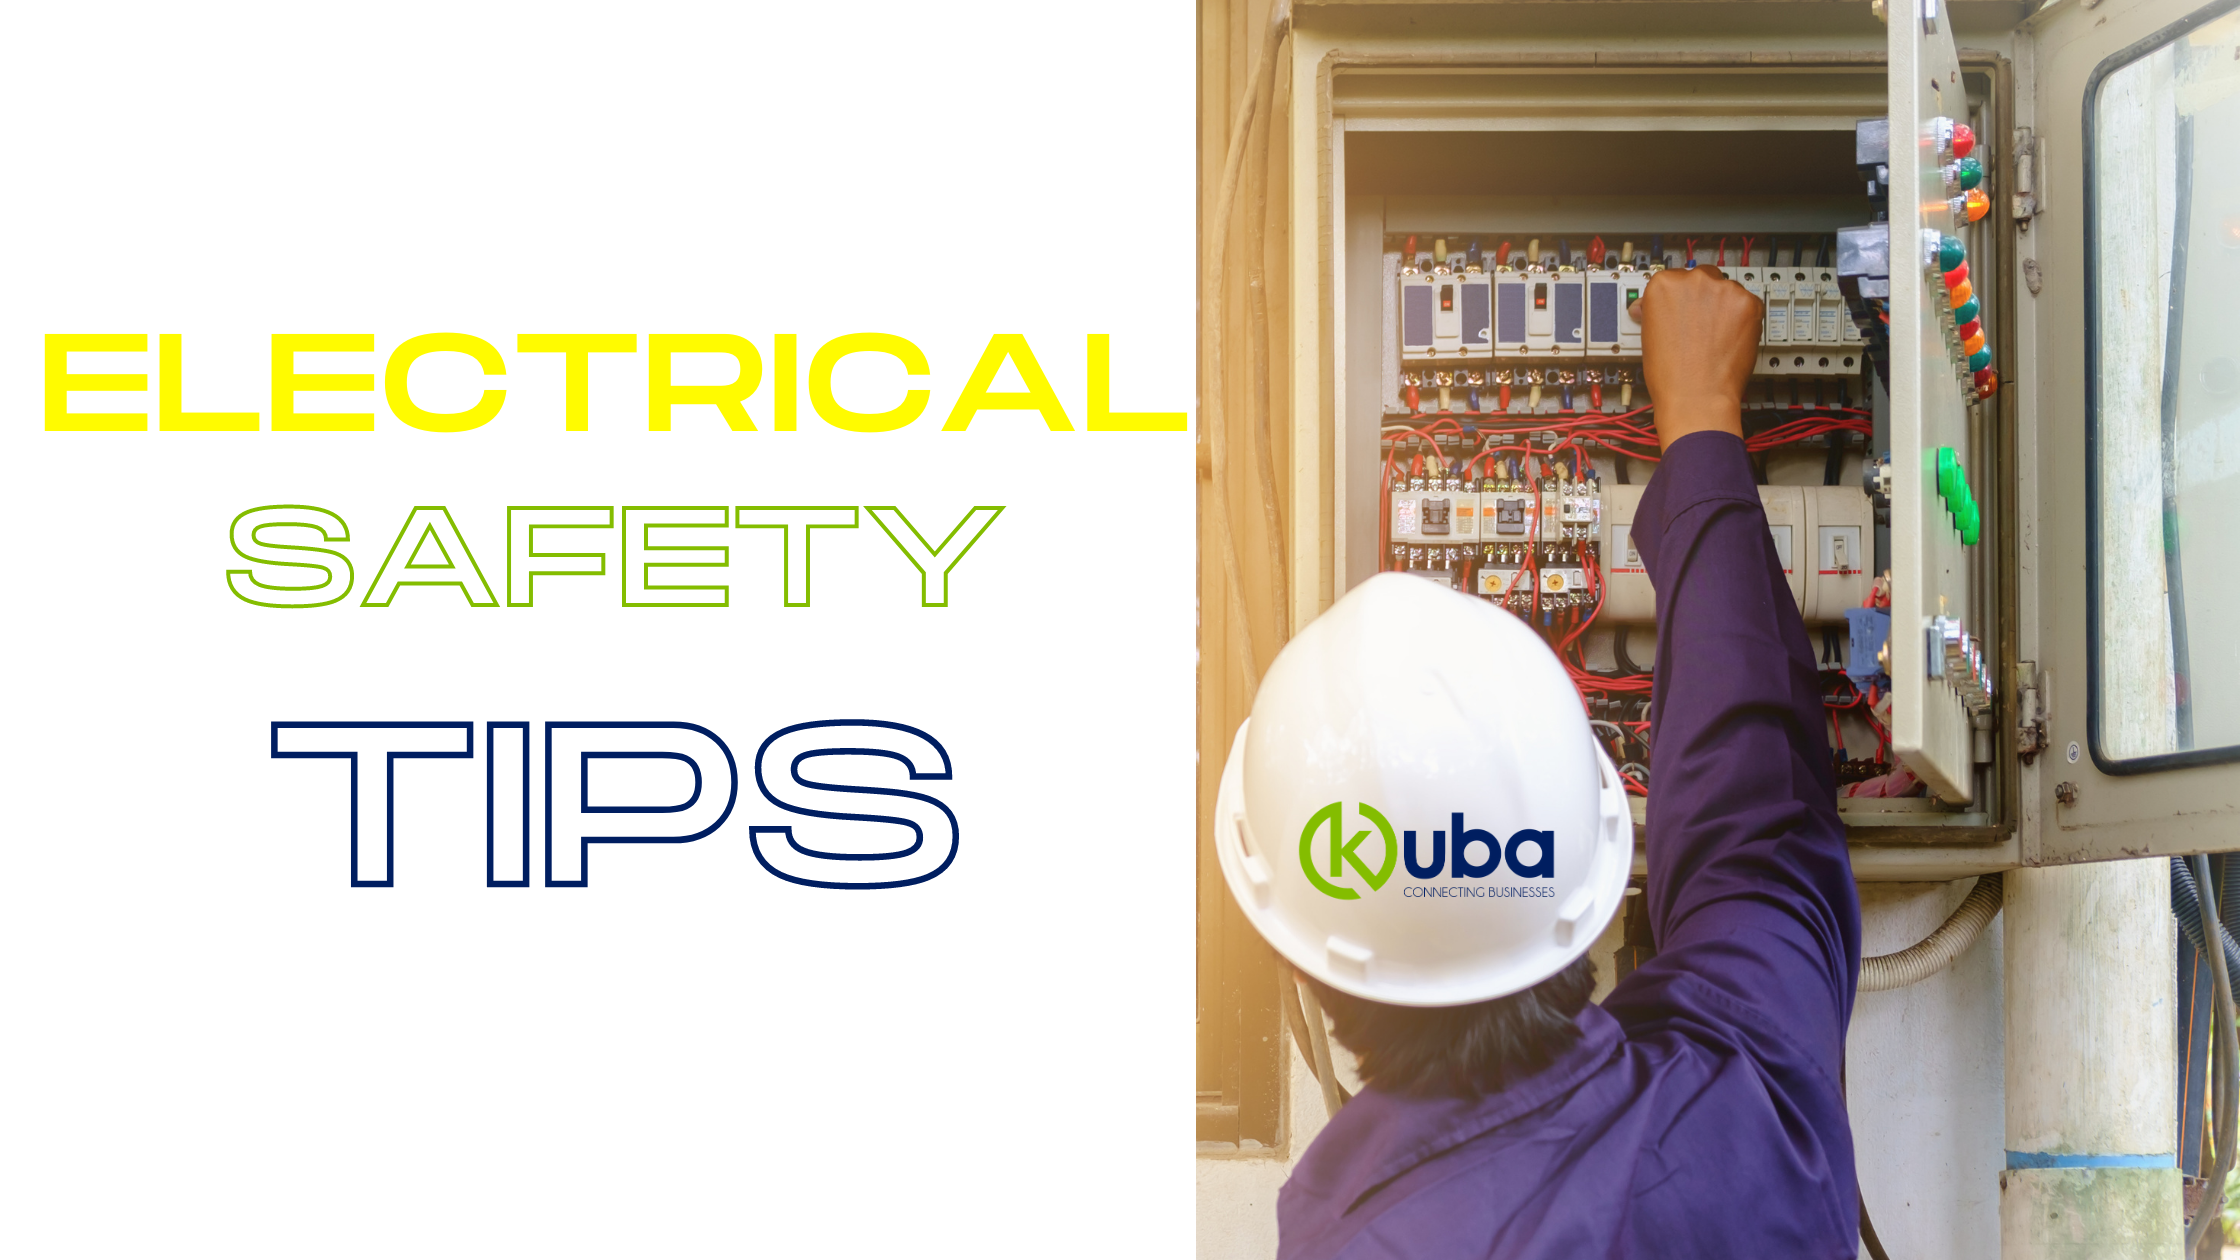 ELECTRICAL SAFETY TIPS FOR YOUR HOME